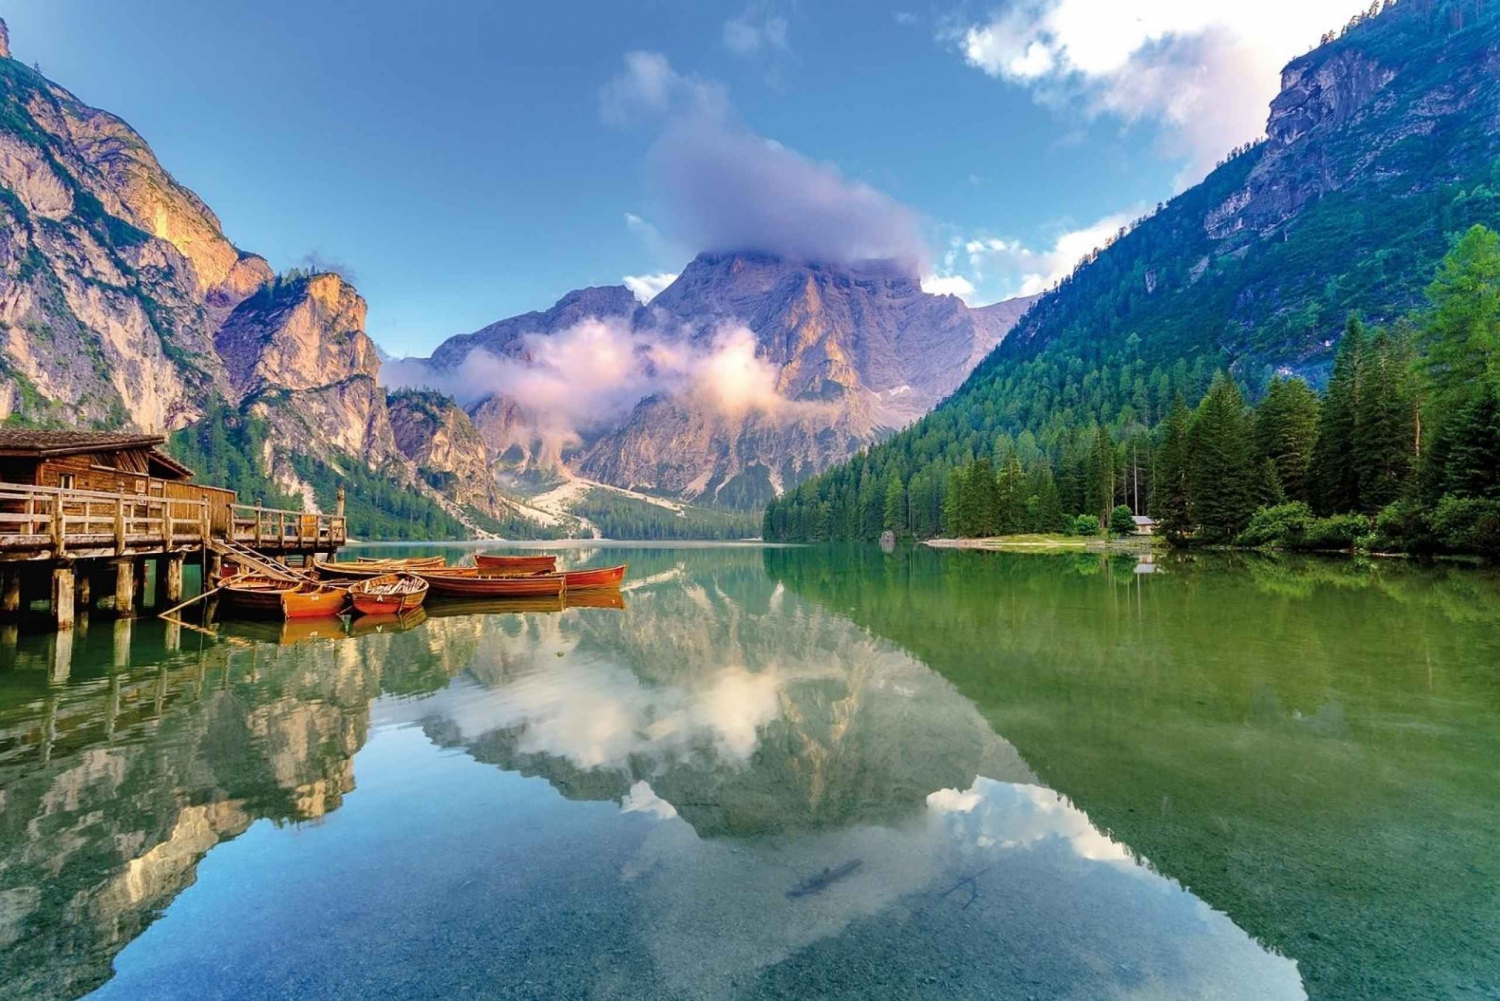 Lake Braies - The most beautiful lake in Italy!